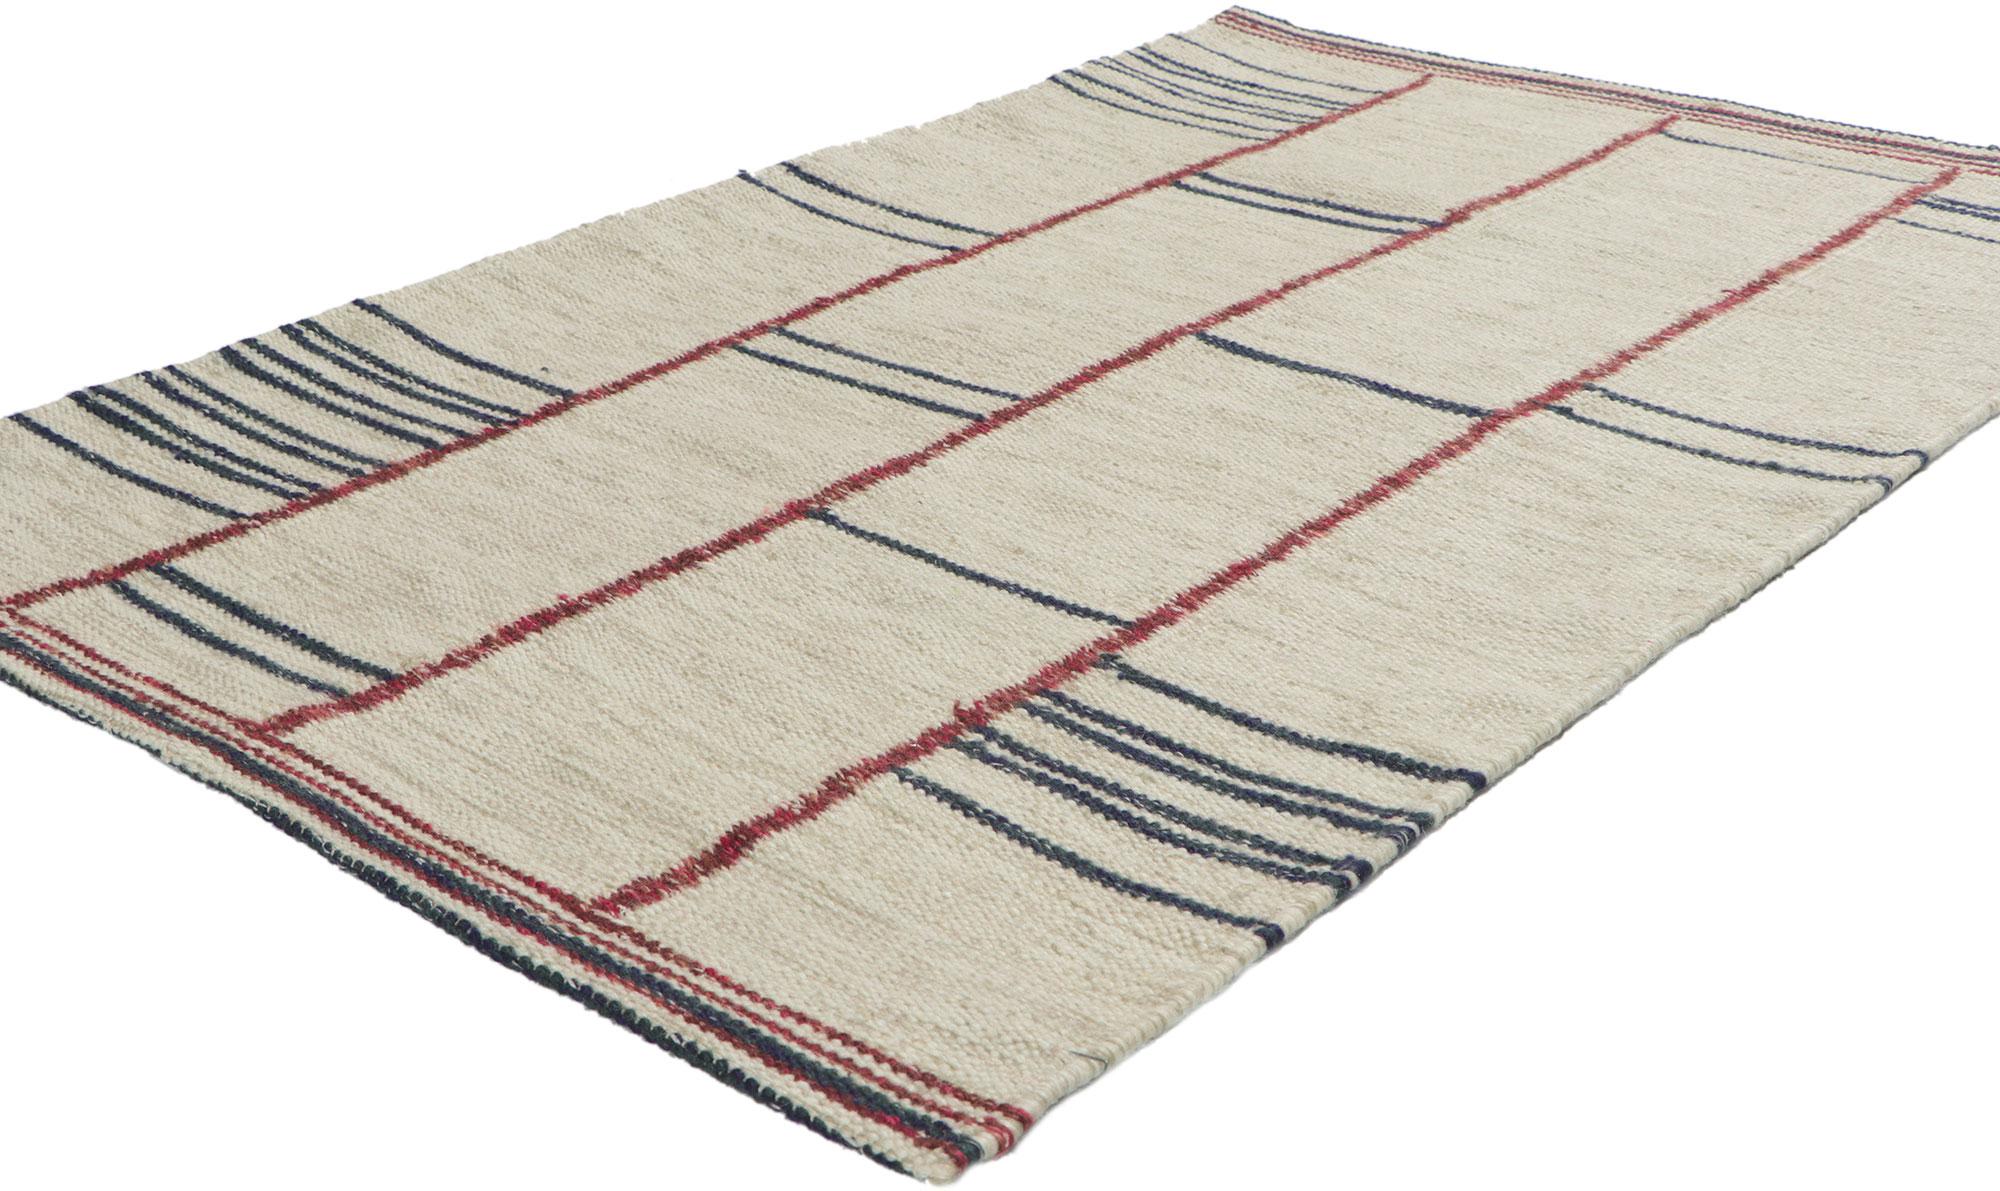 30805 New Swedish Inspired Kilim rug 03'00 x 04'10. With its linear art form and well-balanced asymmetry, this hand-woven wool Swedish inspired Kilim rug provides a feeling of cozy contentment without the clutter. The abrashed oatmeal colored field